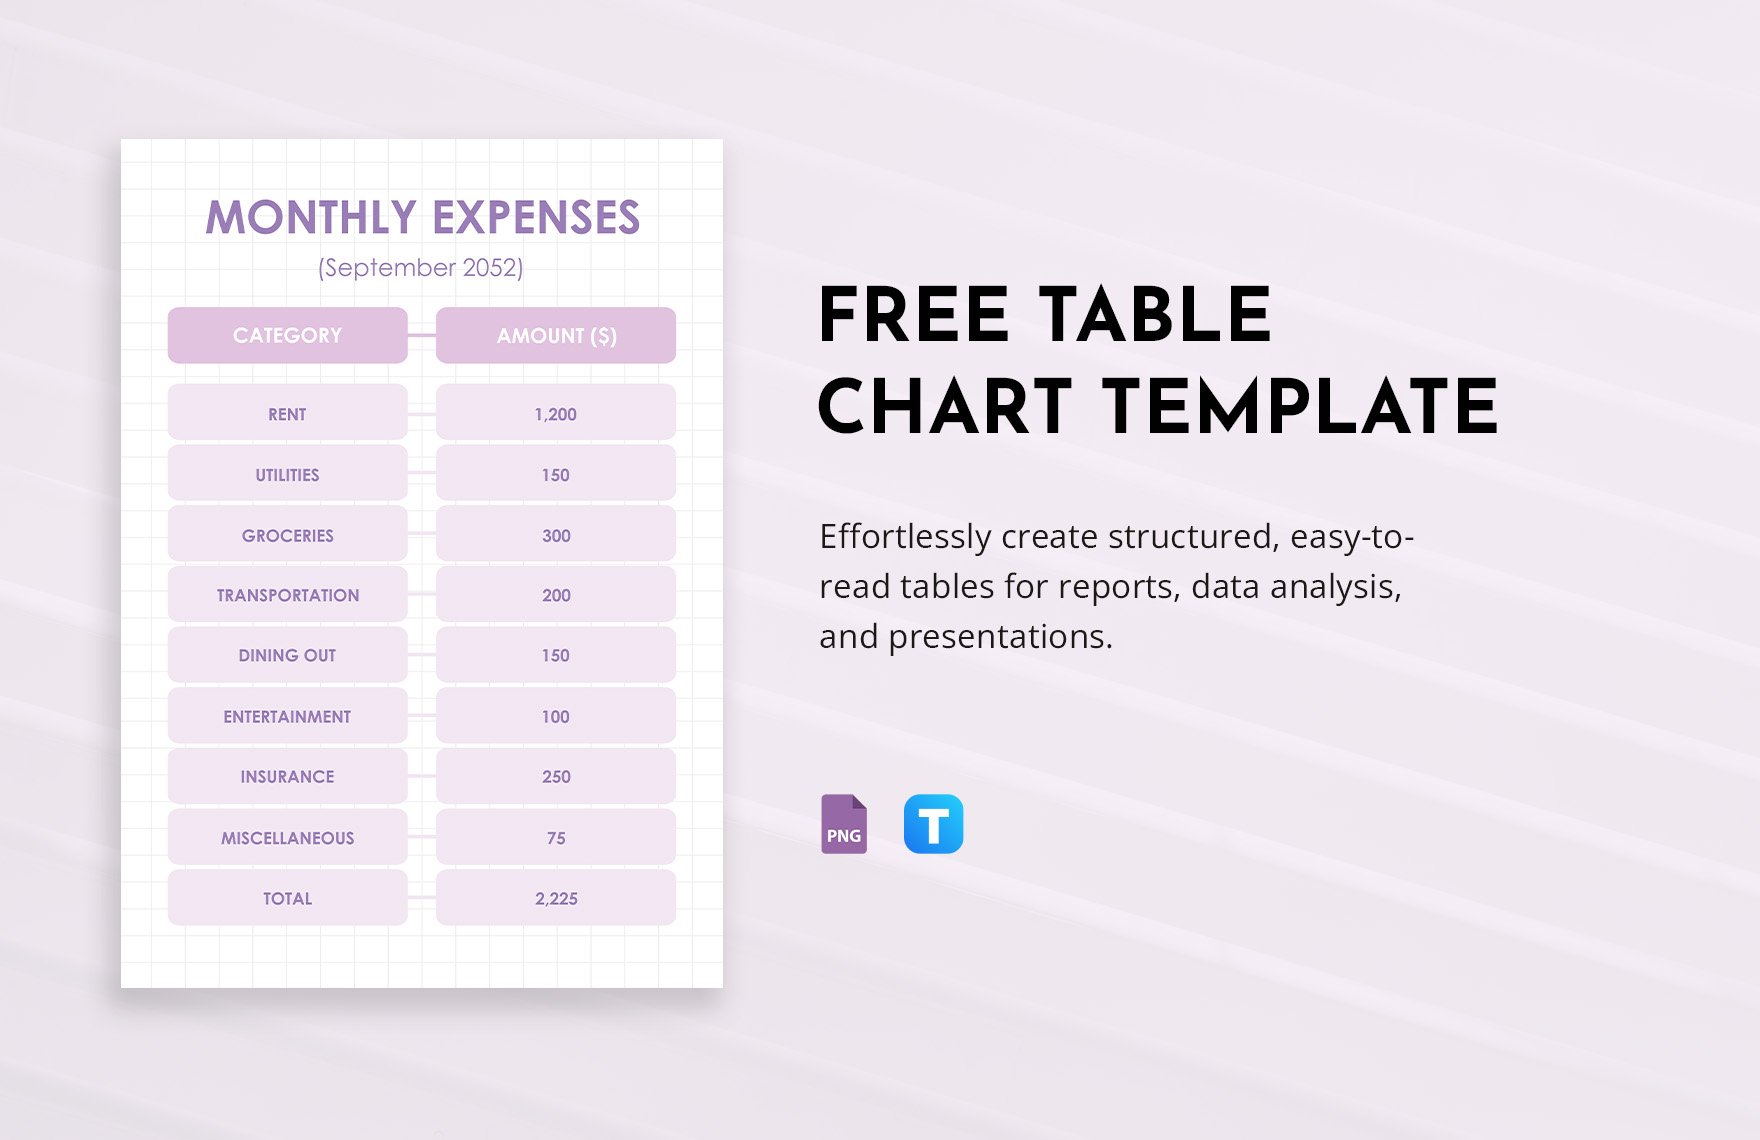 Free Table Chart Template in PNG